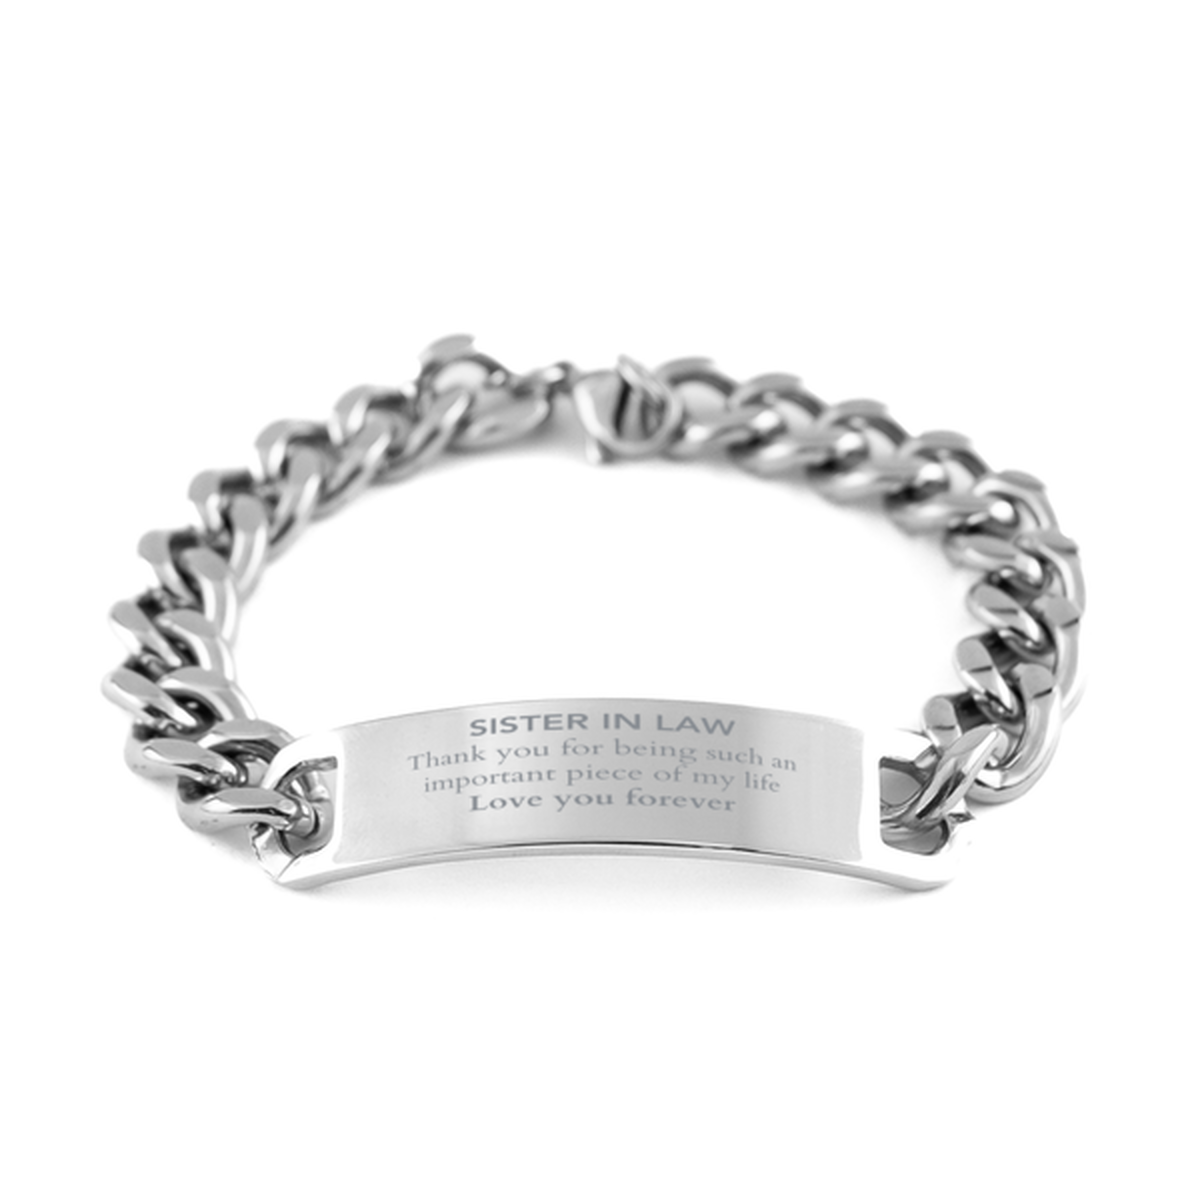 Appropriate Sister In Law Cuban Chain Stainless Steel Bracelet Epic Birthday Gifts for Sister In Law Thank you for being such an important piece of my life Sister In Law Christmas Mothers Fathers Day